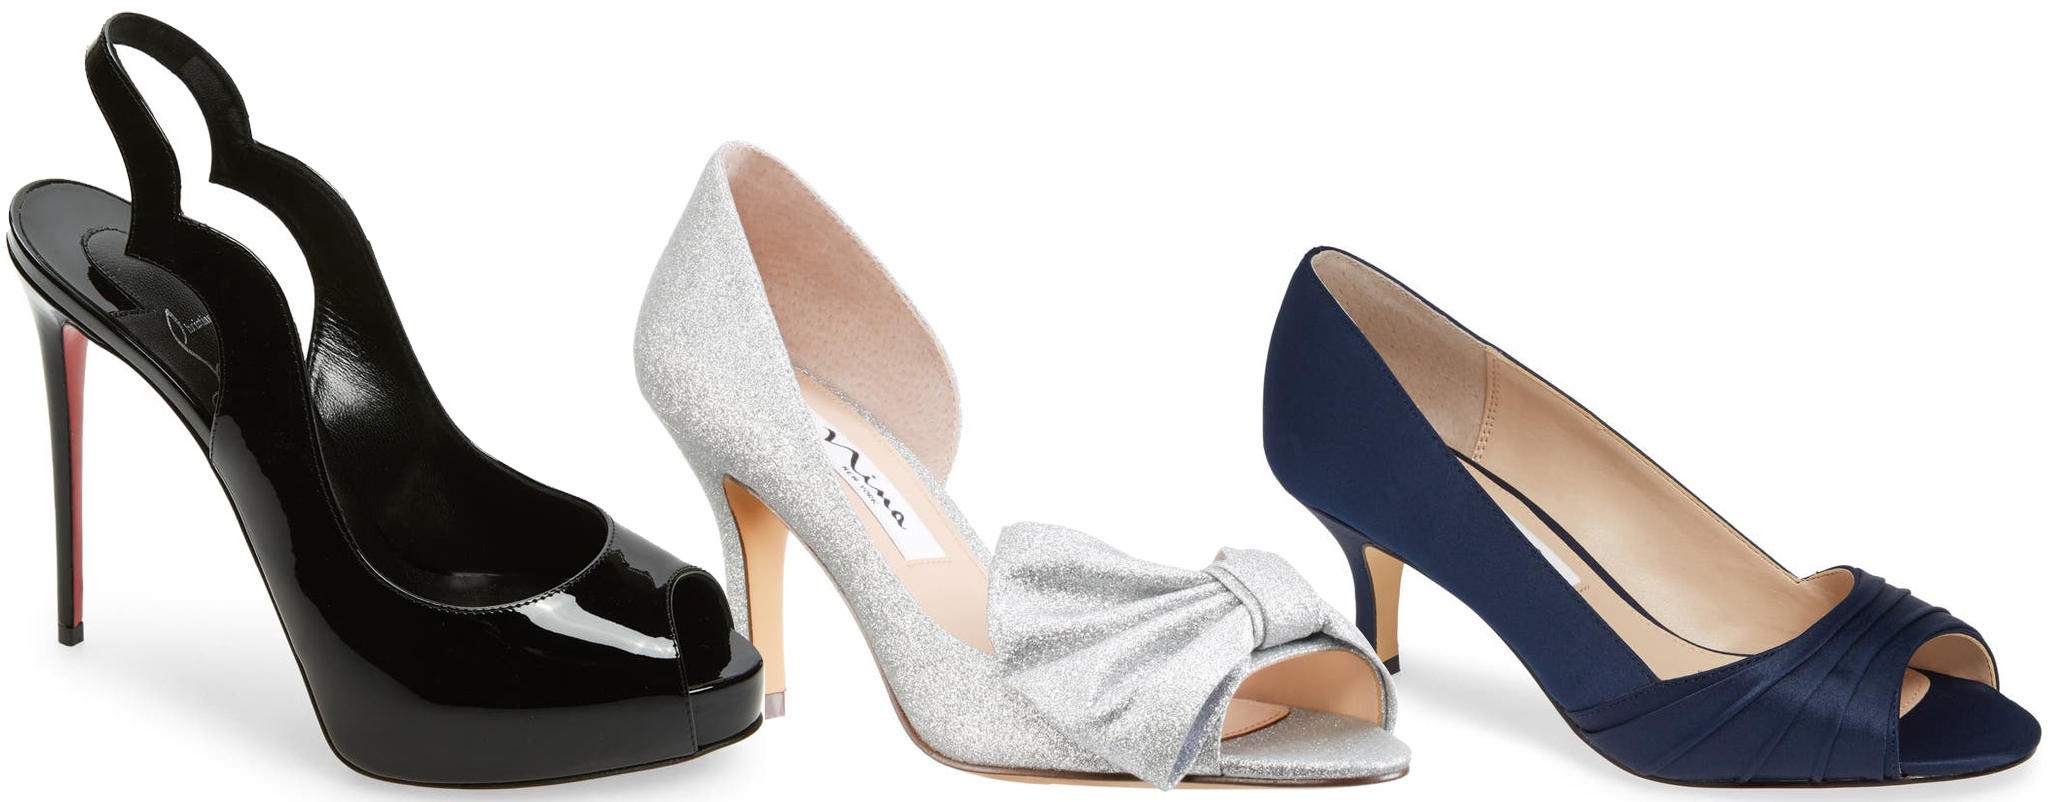 Peep-toe pumps have an open-toe design and can come in any heel height